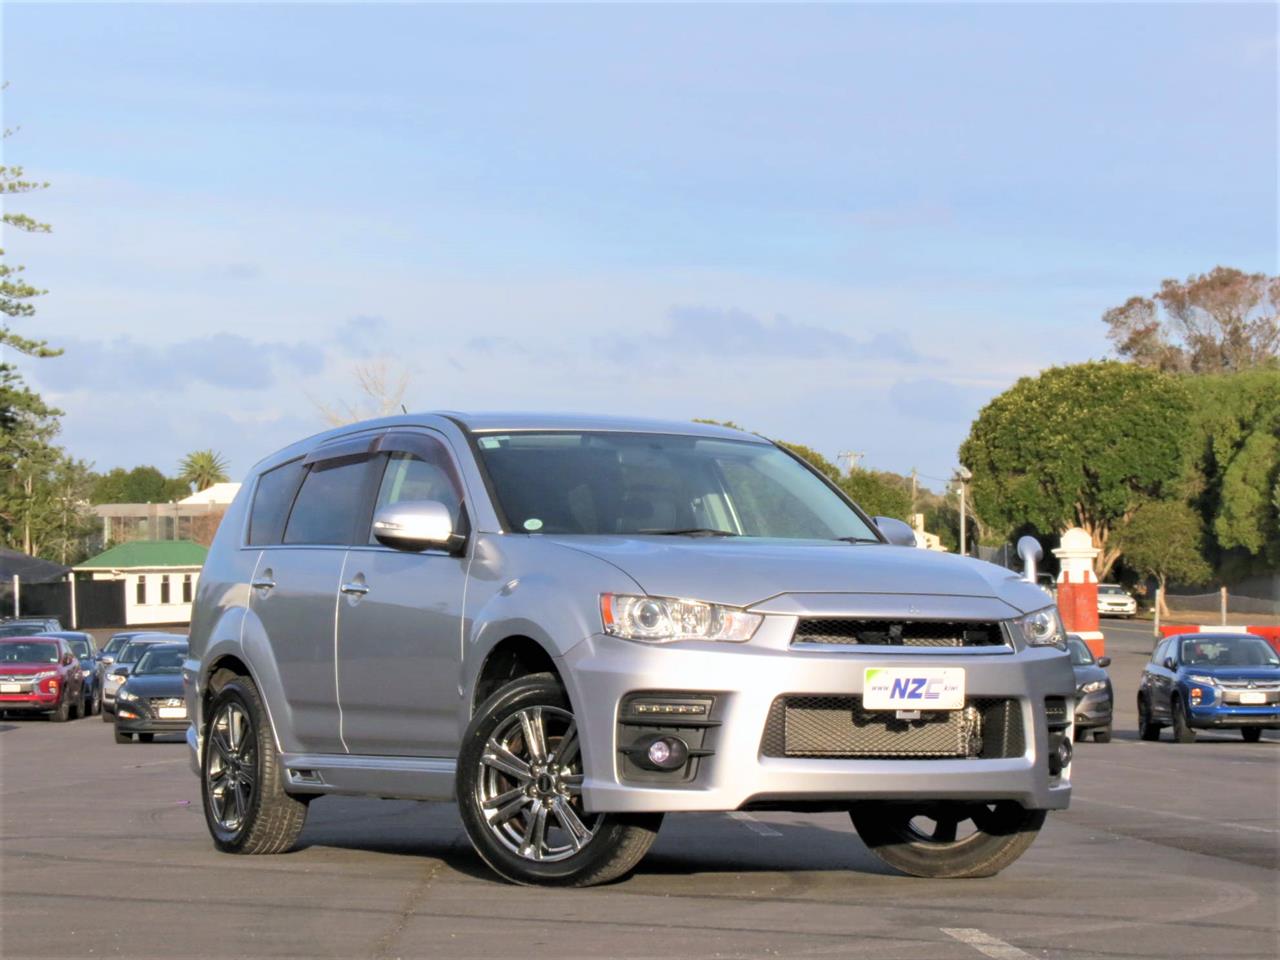 NZC 2011 Mitsubishi Outlander just arrived to Auckland